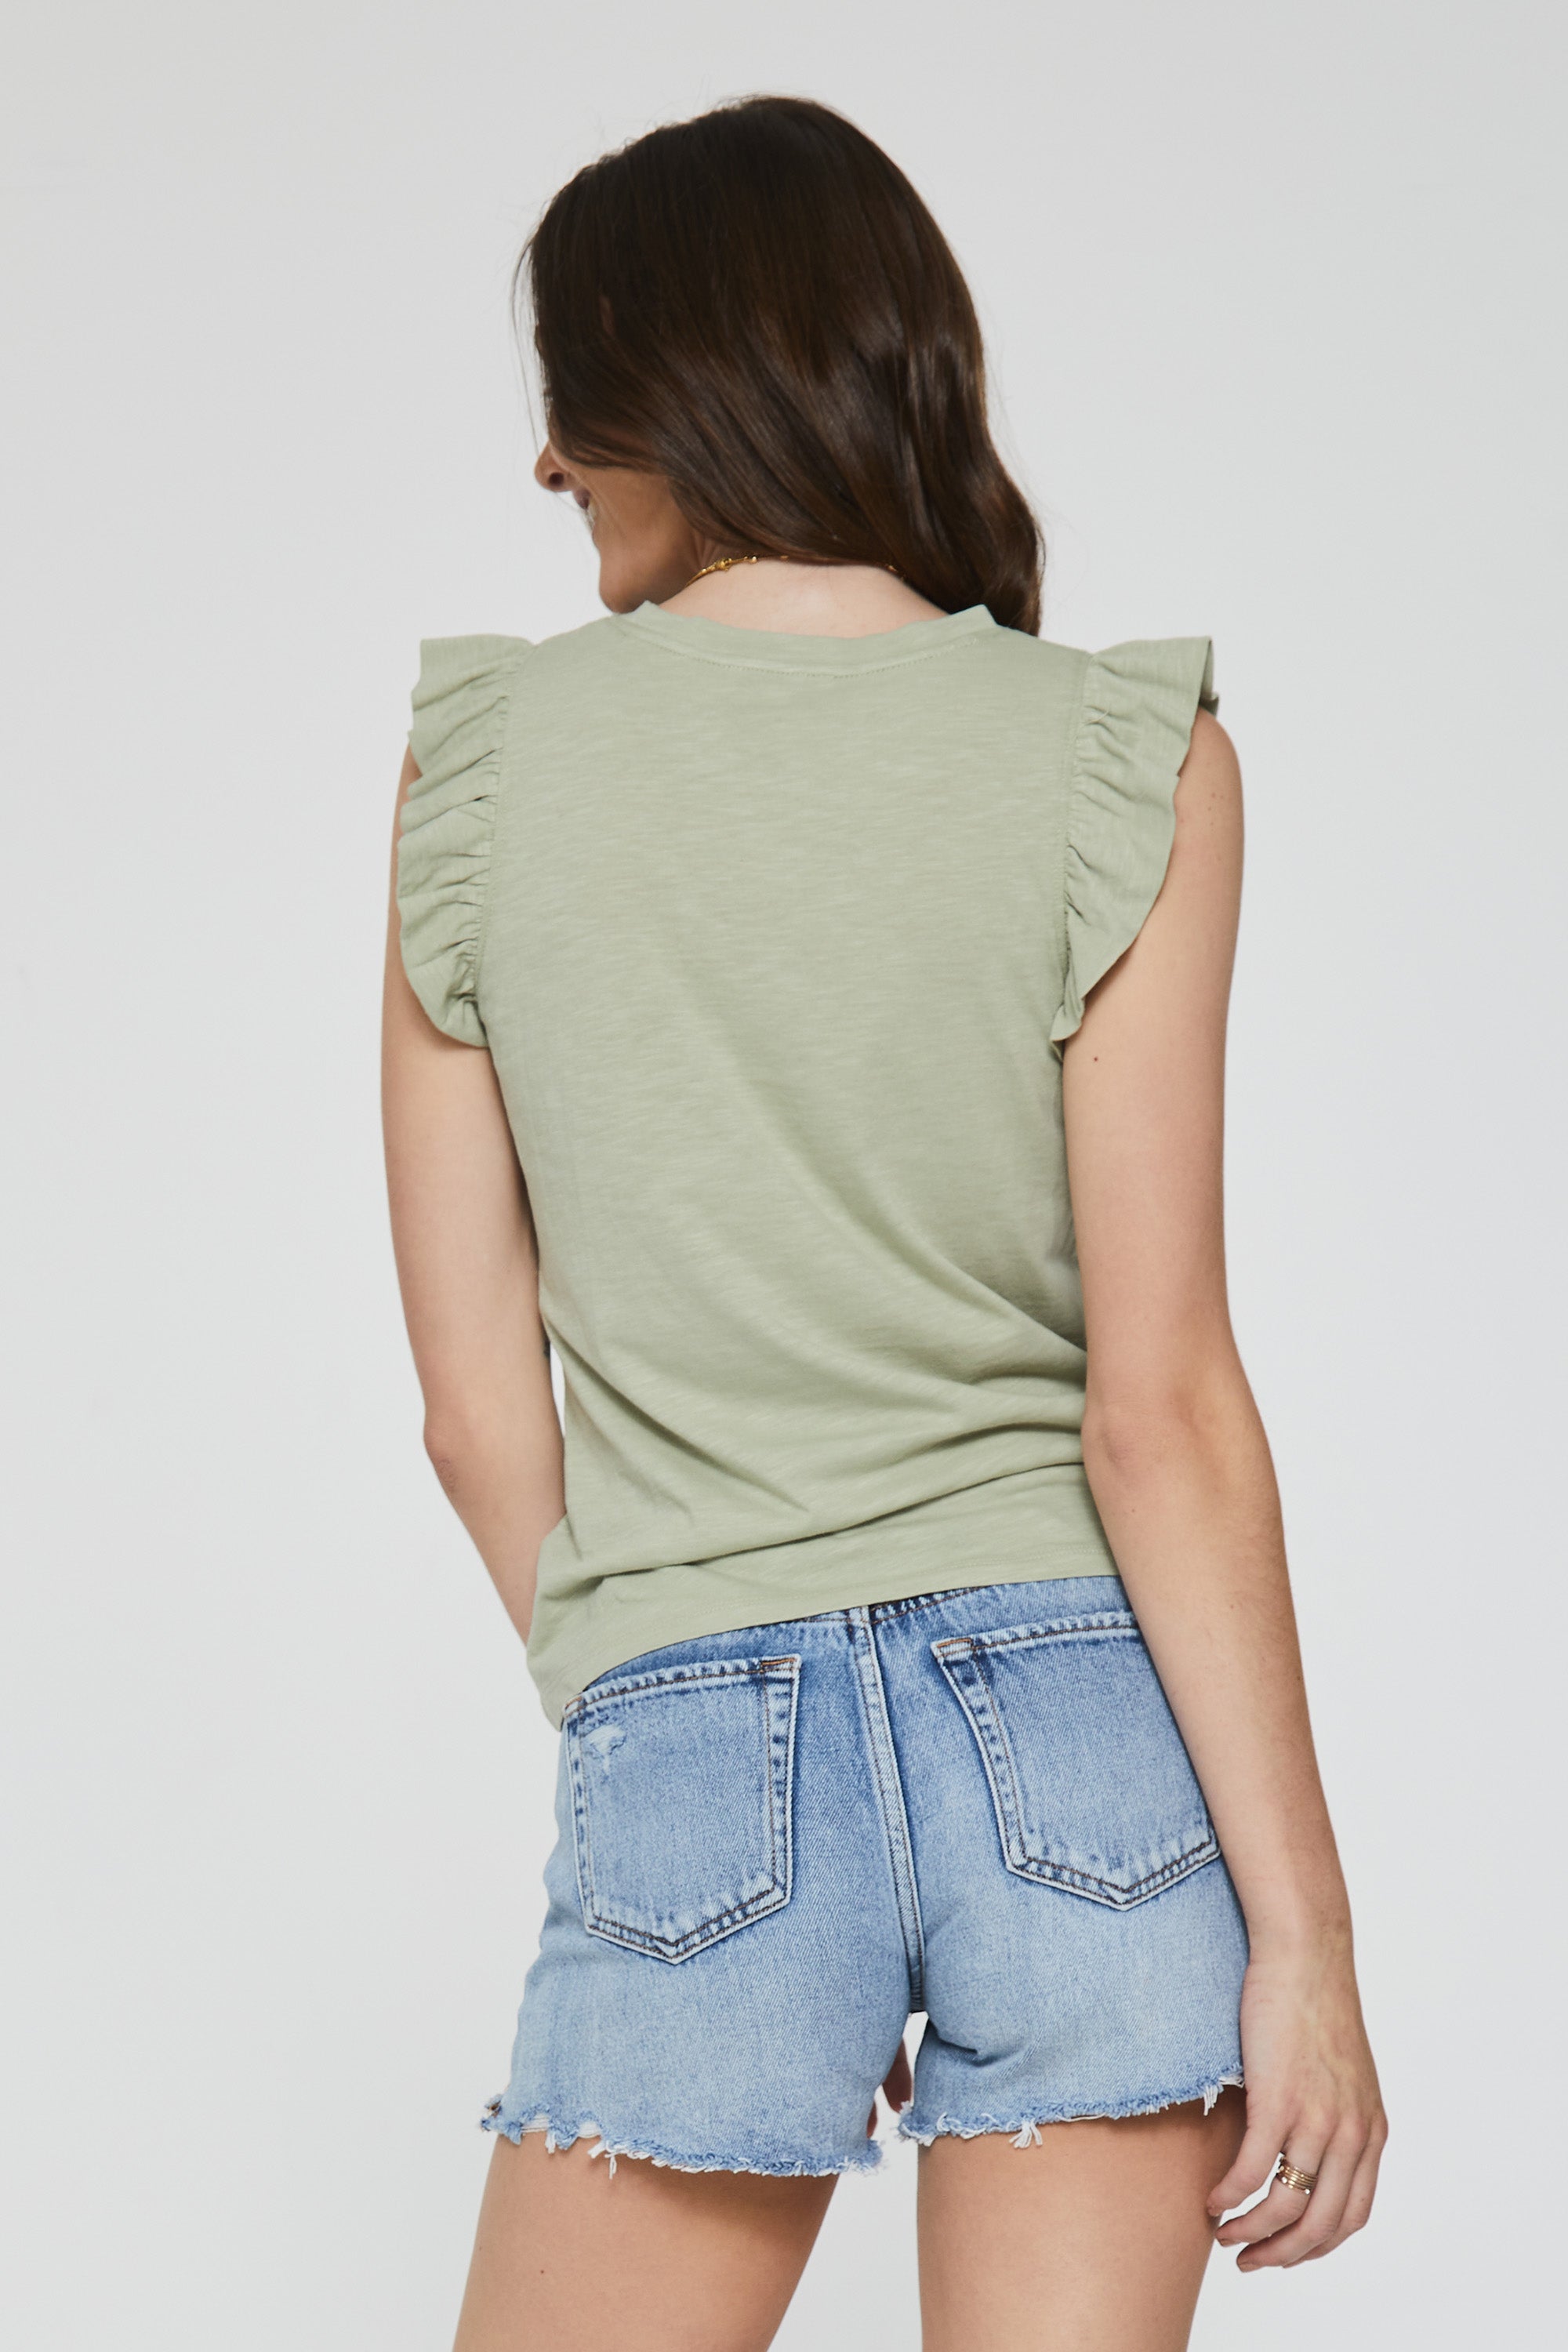 north-ruffle-trimmed-top-pistachio-back-image-another-love-clothing